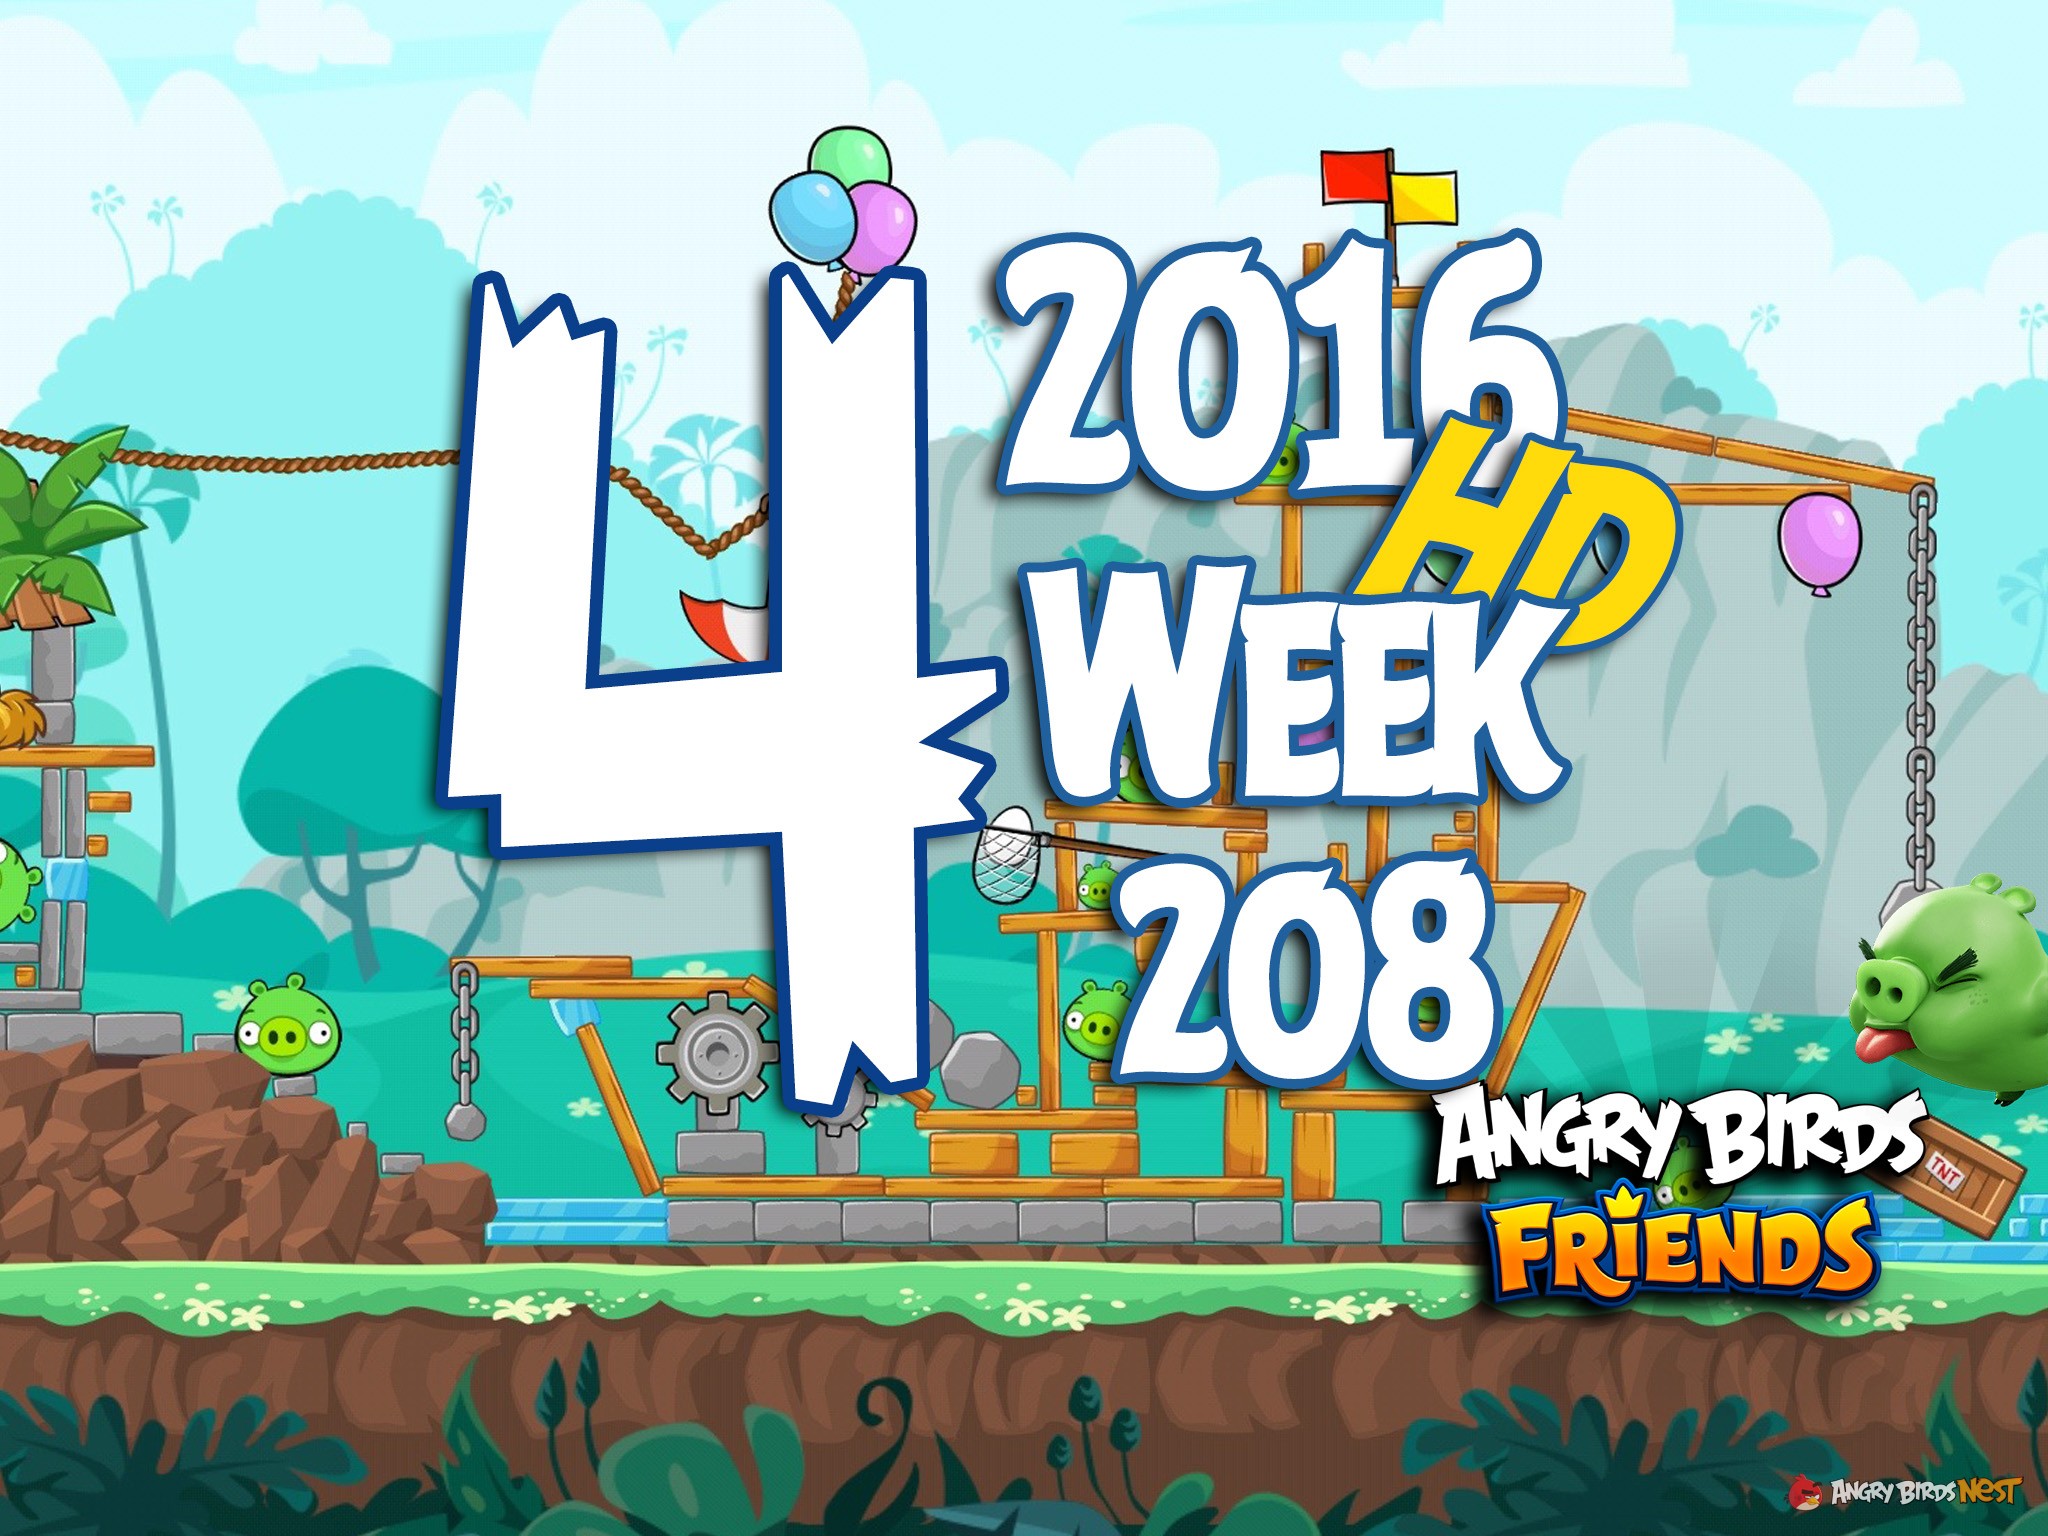 Angry Birds Friends Tournament Level 4 Week 208 Walkthrough | May 12th 2016